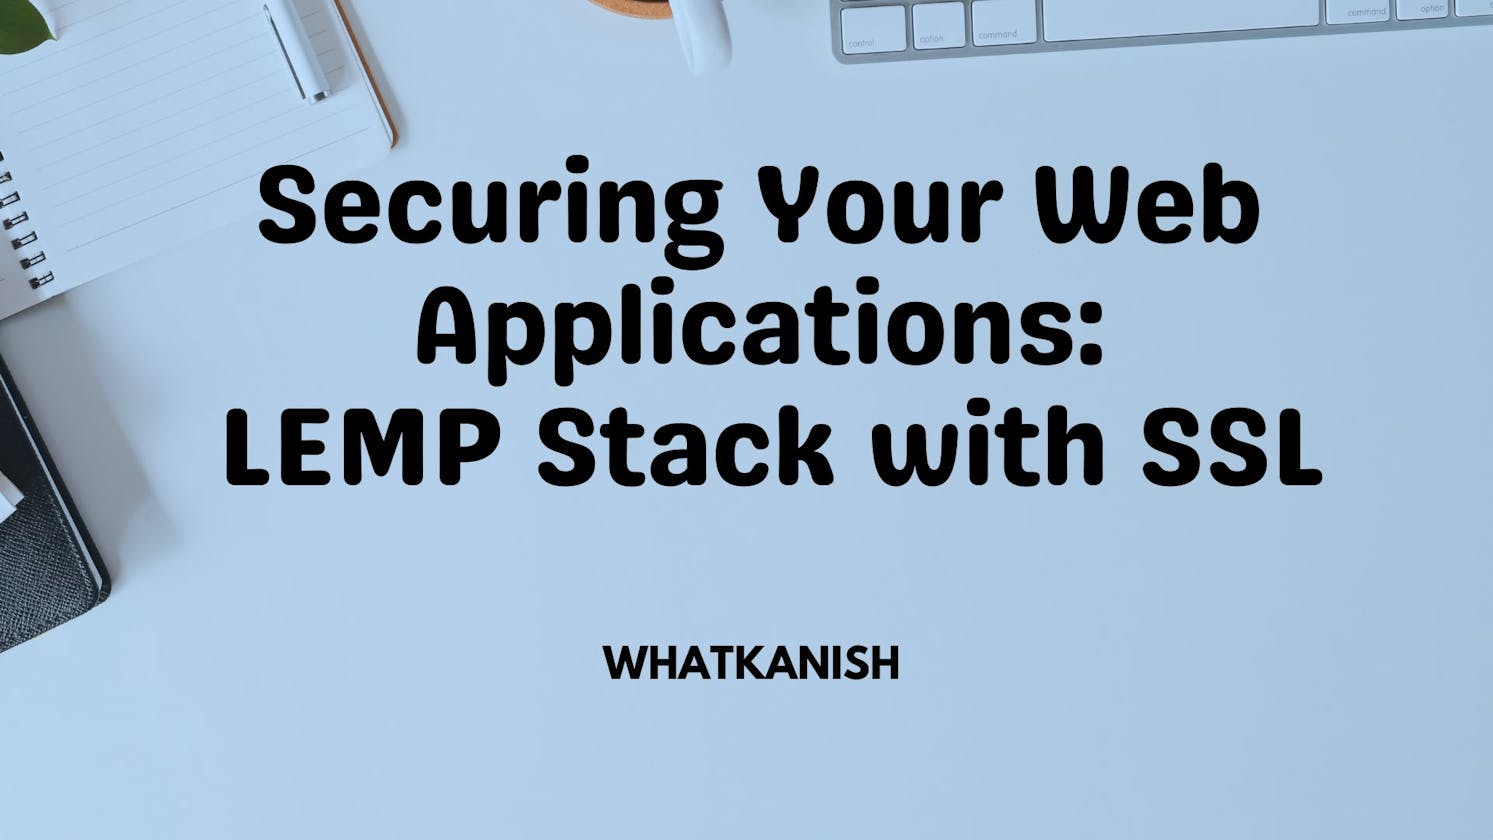 💻Setting Up a LEMP Stack with SSL